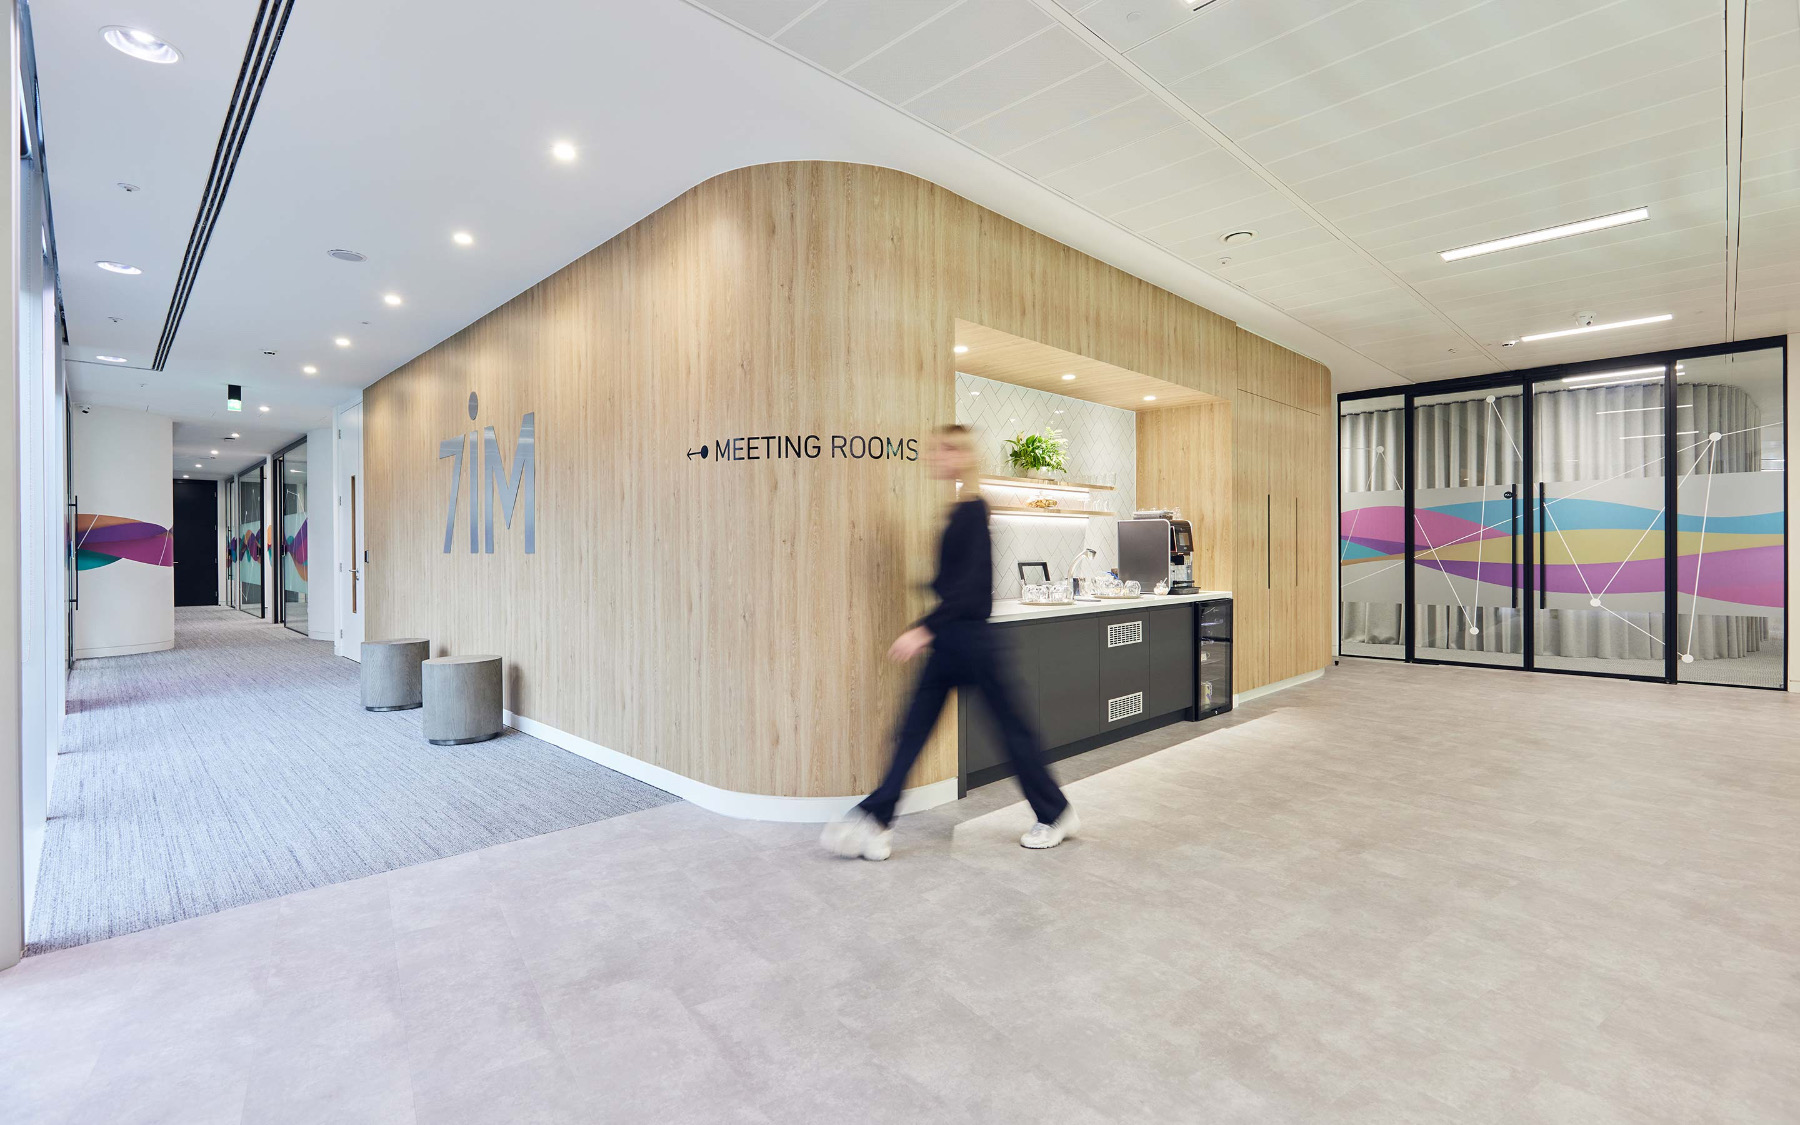 A Tour of Seven Investment Management’s New London Office